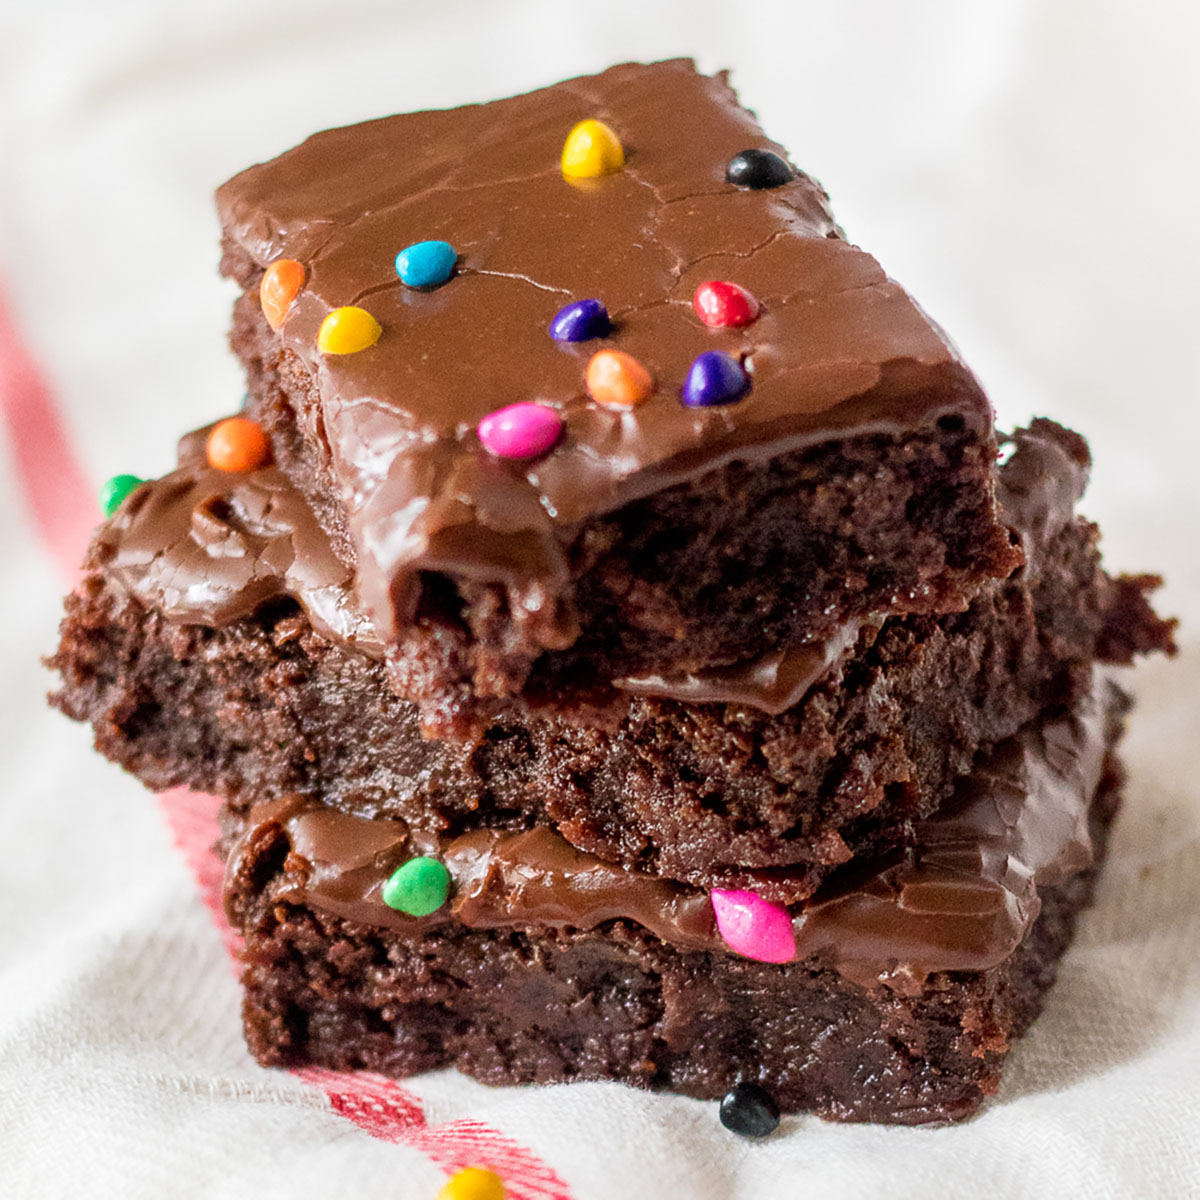 https://www.persnicketyplates.com/wp-content/uploads/2020/07/cosmic-brownies-SQUARE.jpg